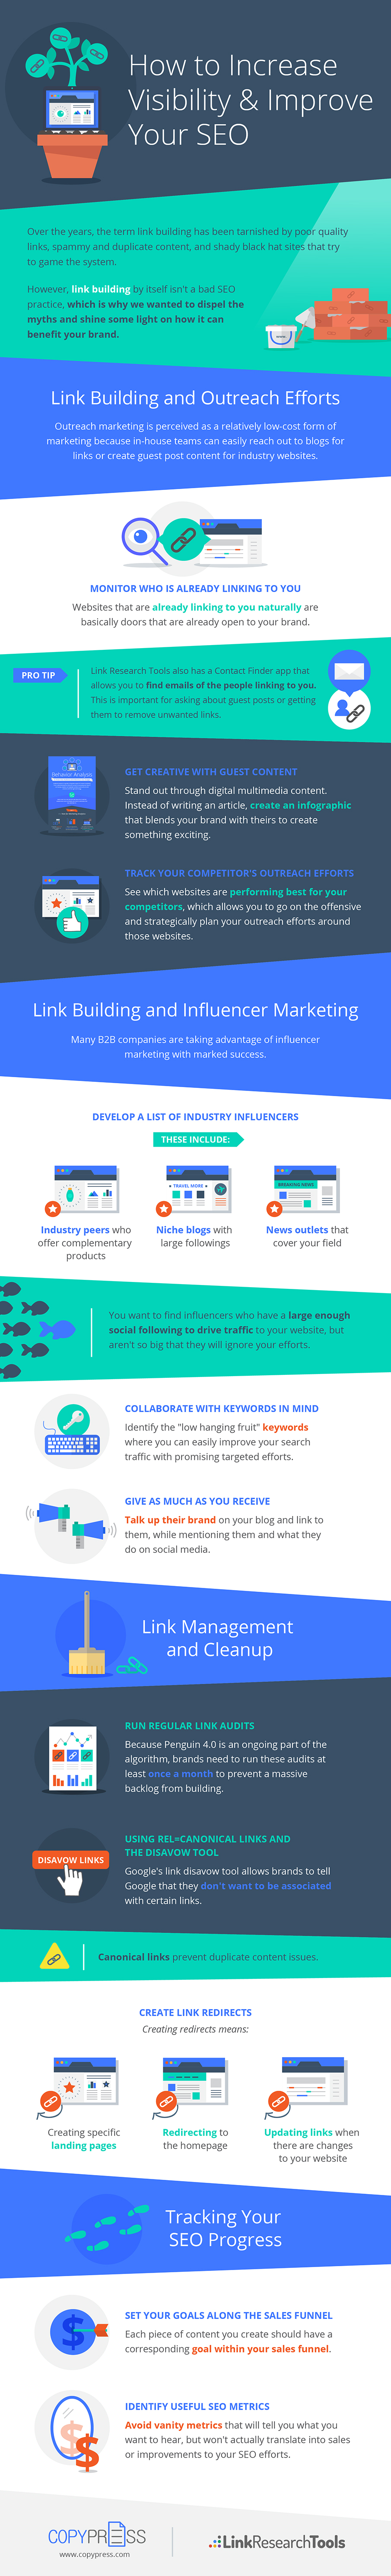 improve visibility with seo infographic